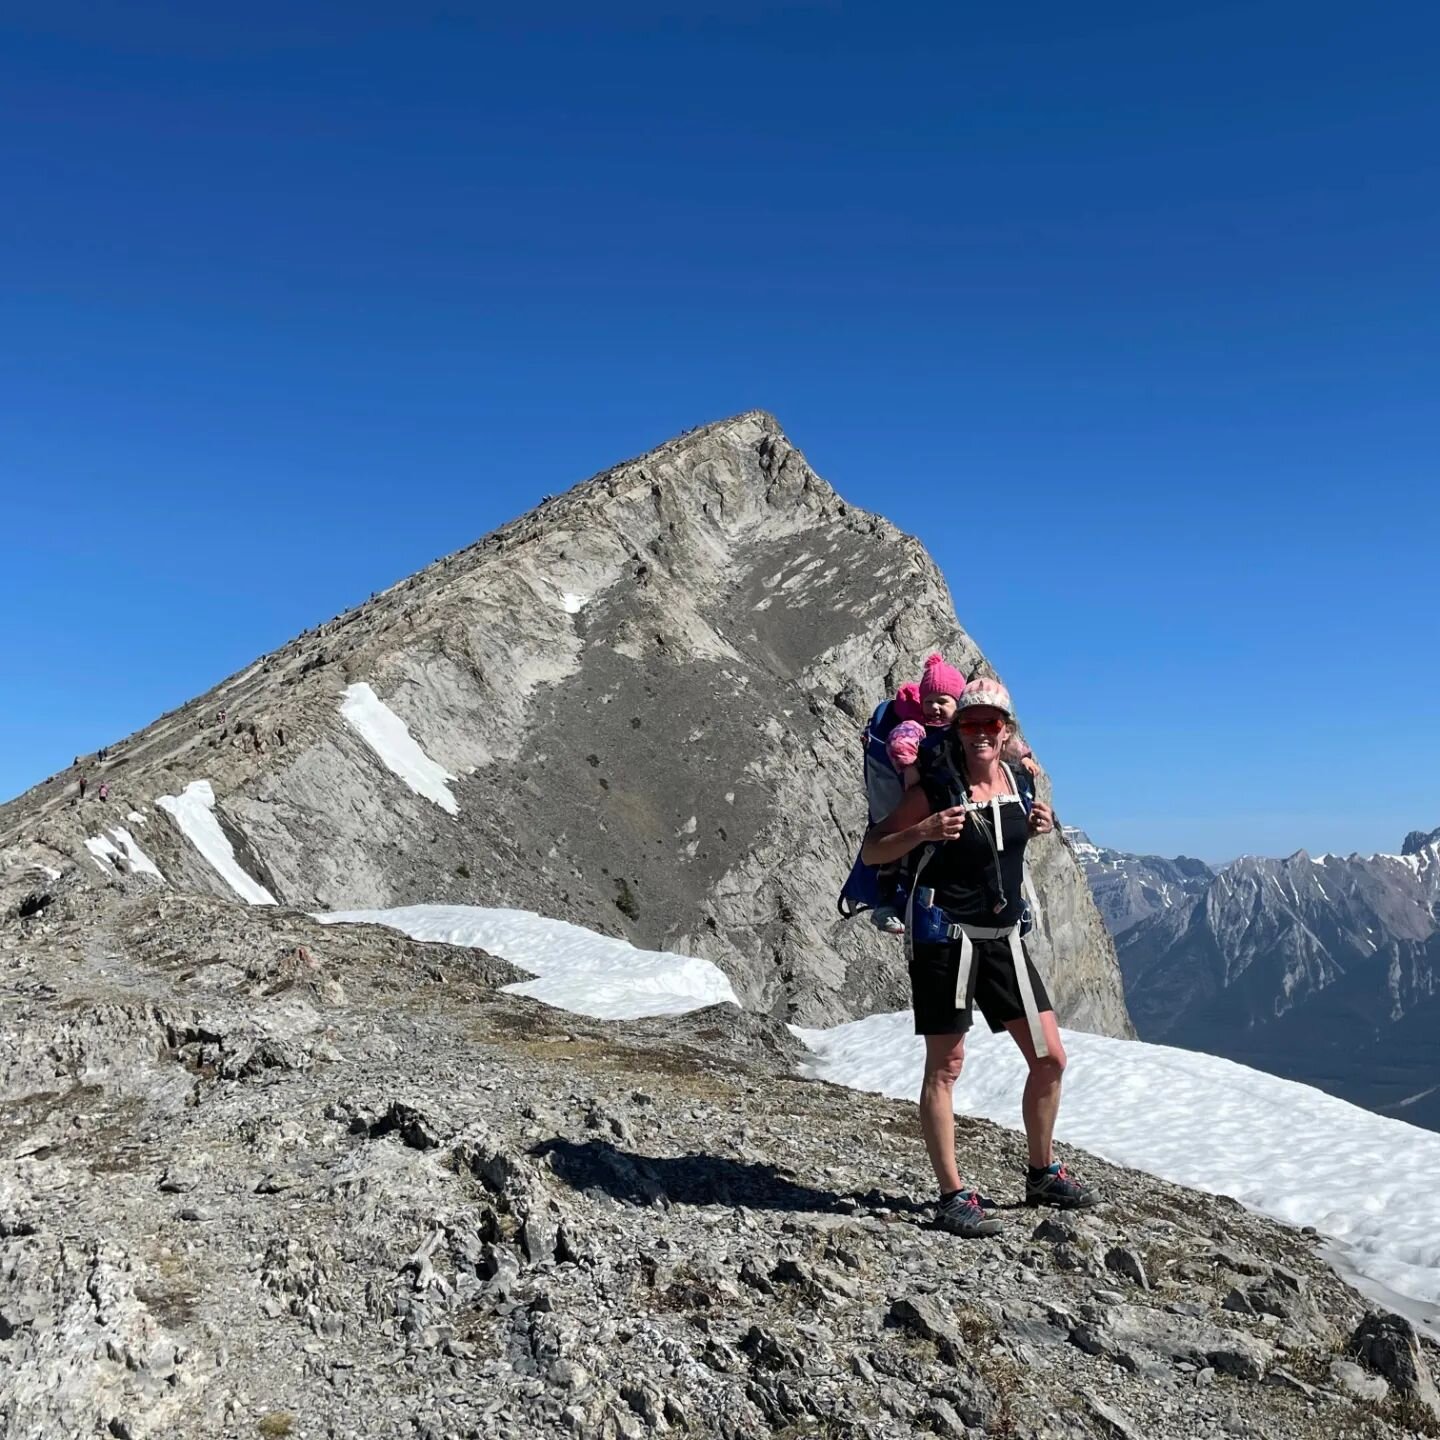 Stella's 4th time up Haling Peak! 3 times in the belly and most recently doing a combo of in the backpack and on foot.

It was my blissful way to spend Mothers Day - a gift that keeps on giving as now when we open Stella's curtains in the mornings an